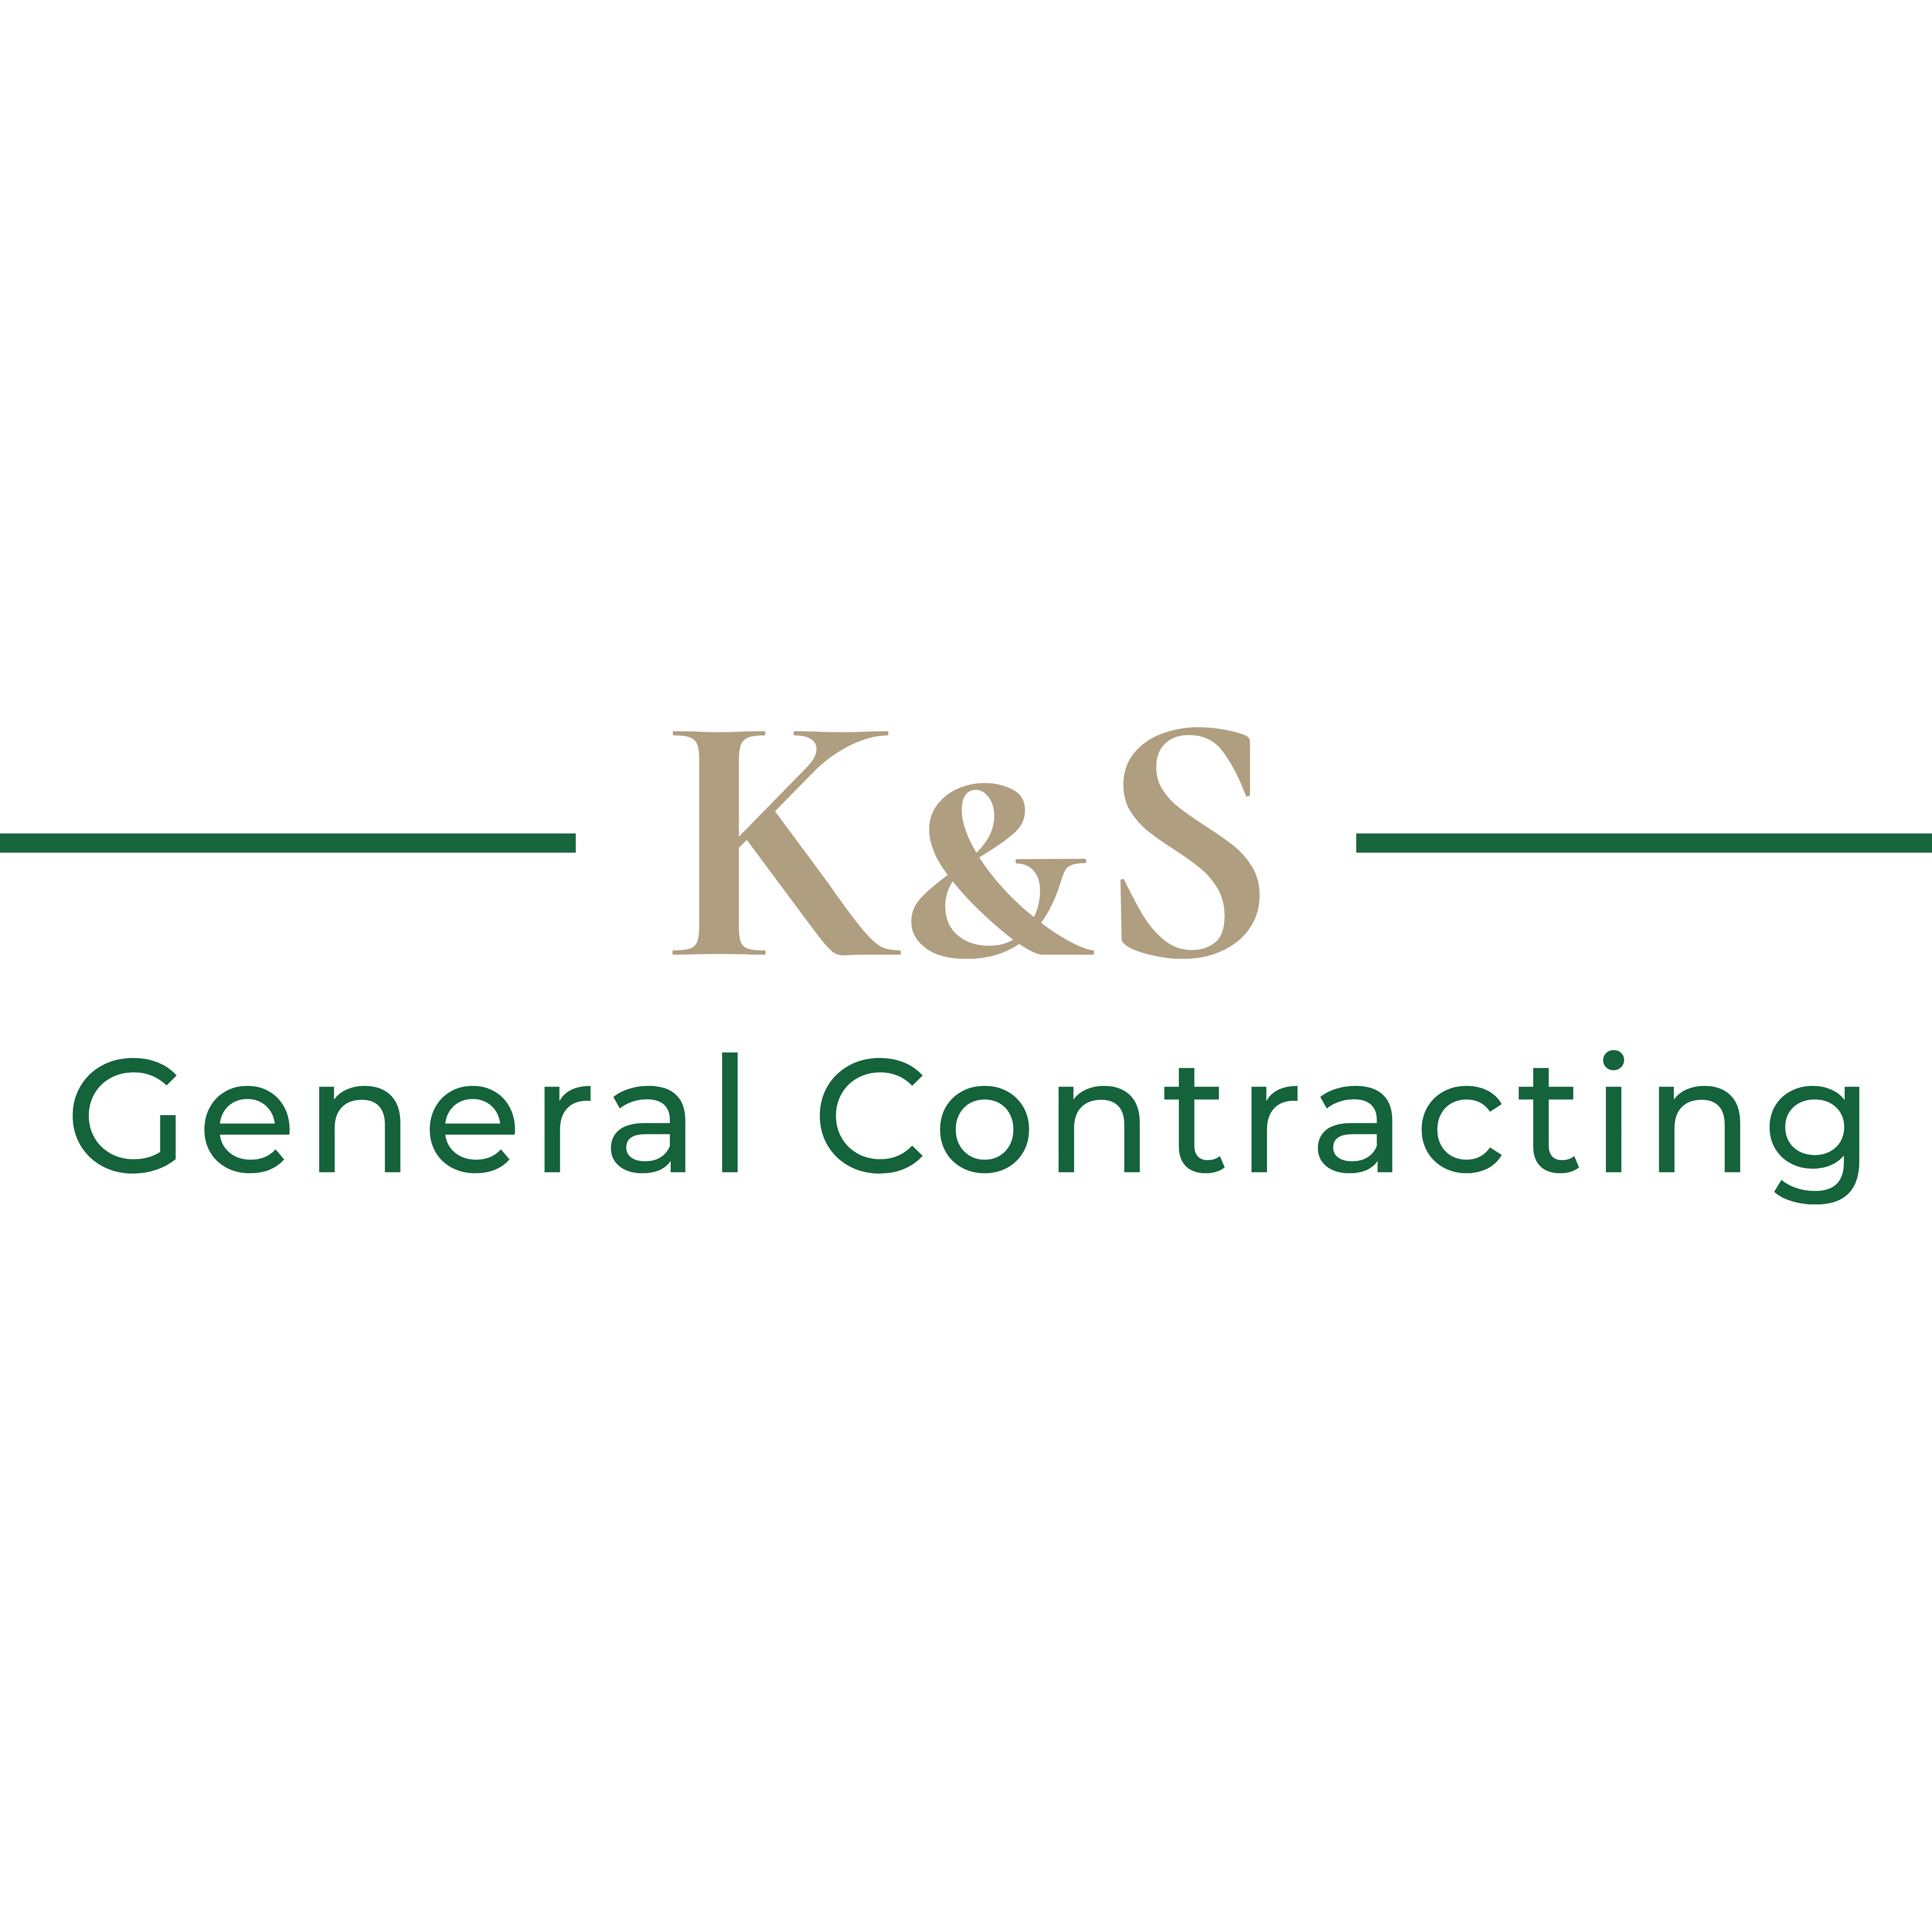 K&S General Contracting - Chicago, IL - (847)895-0448 | ShowMeLocal.com